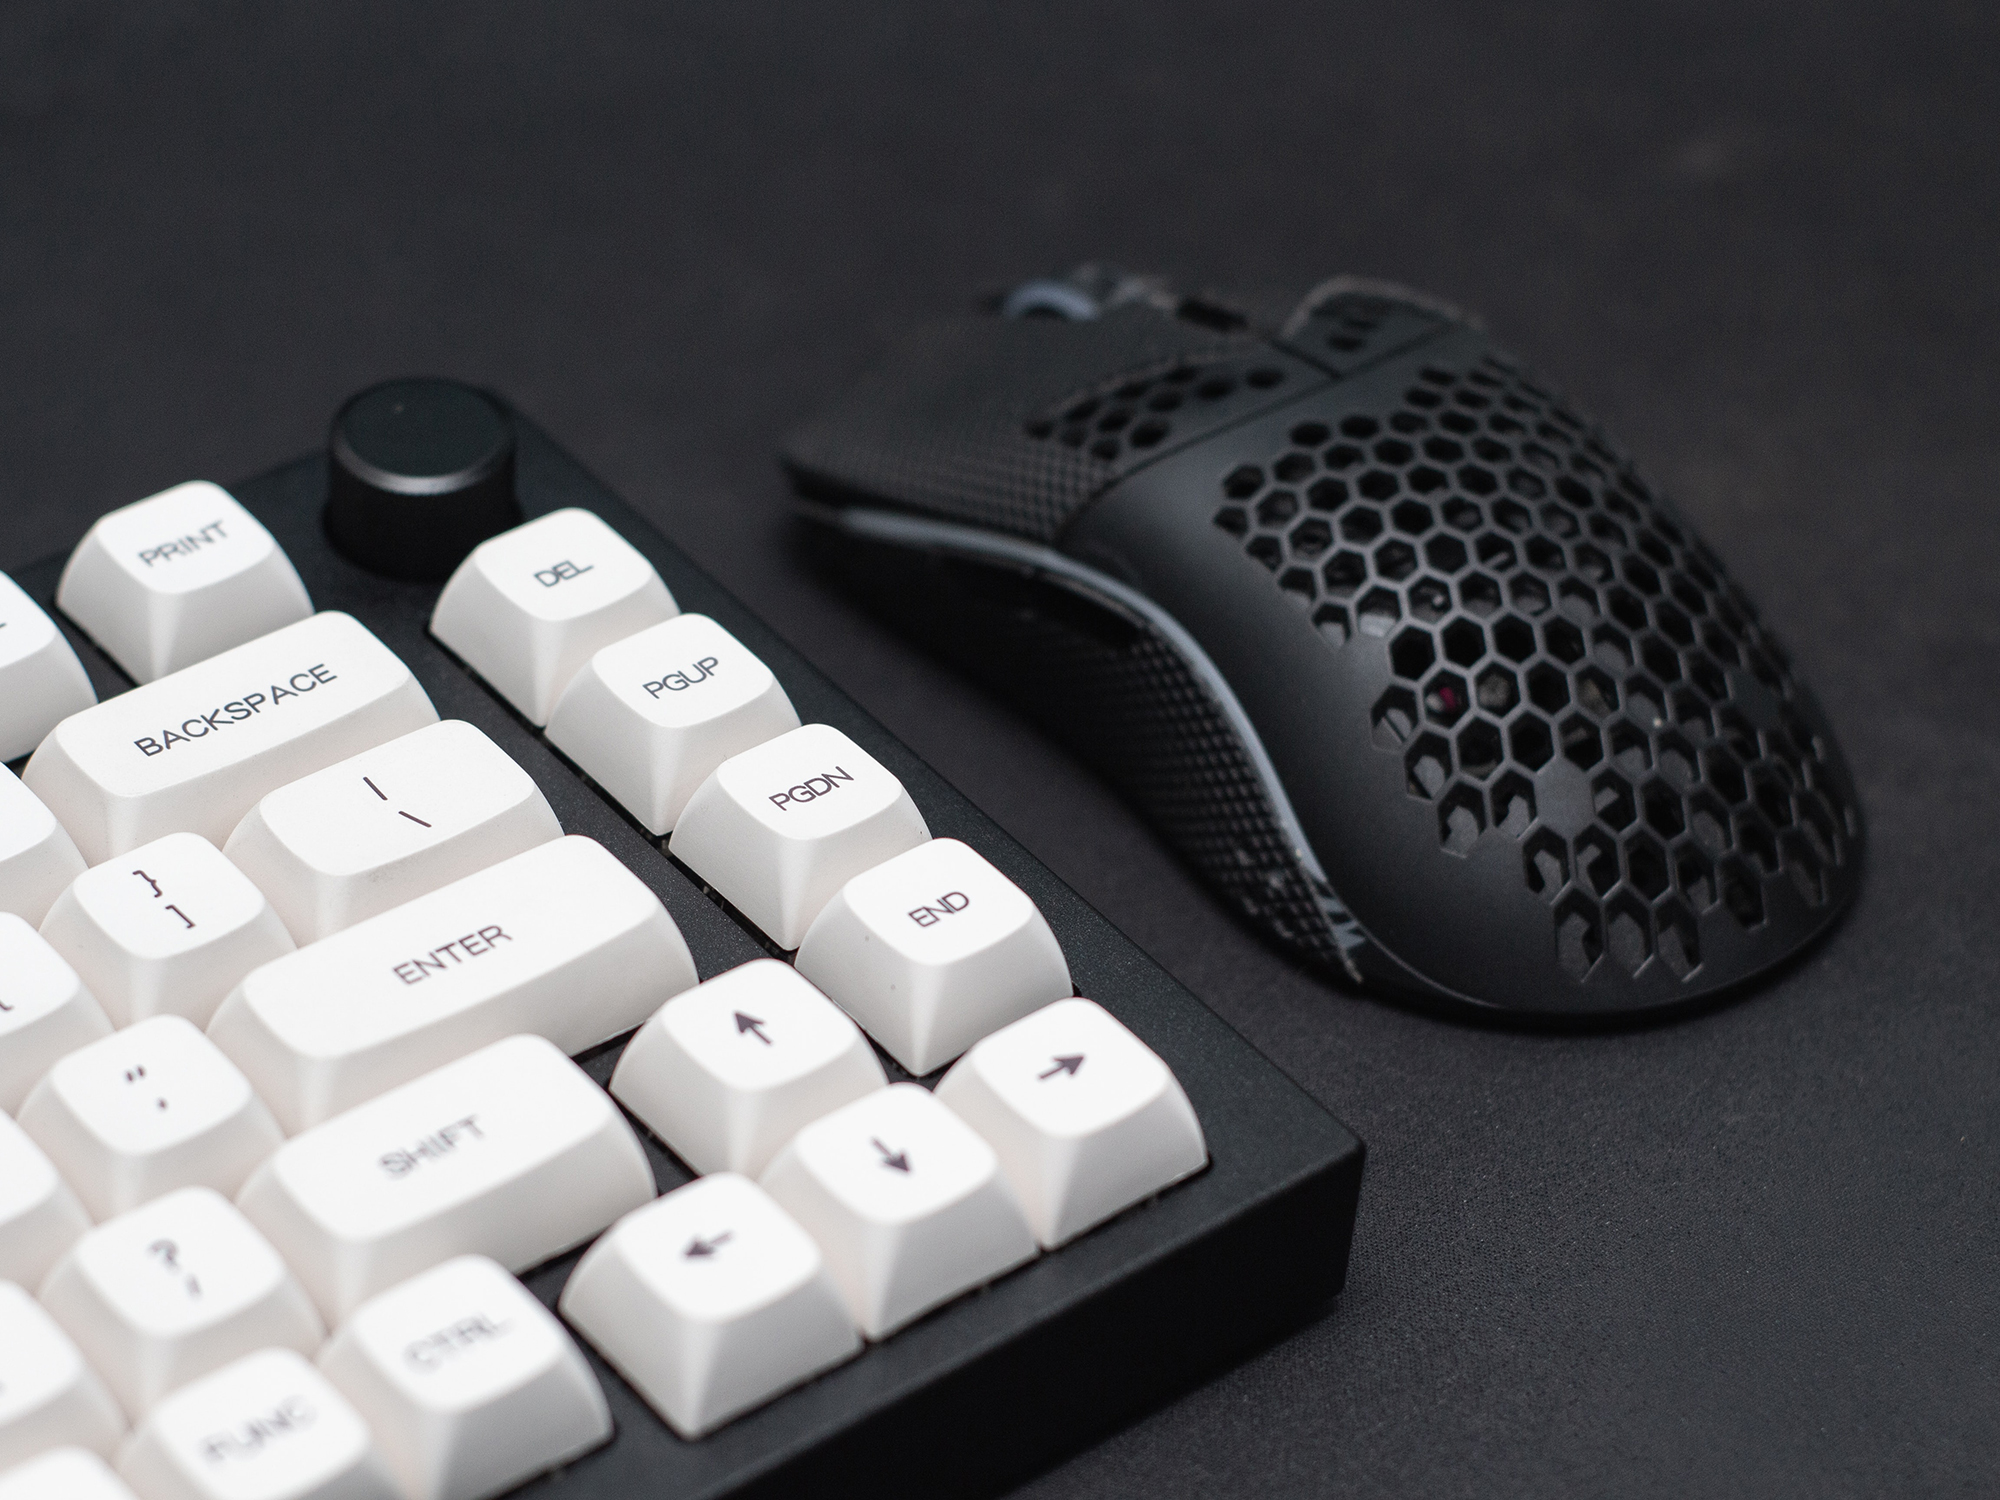 https://www.popsci.com/uploads/2022/10/04/photo-of-a-white-keyboard-and-a-black-mouse.jpg?auto=webp